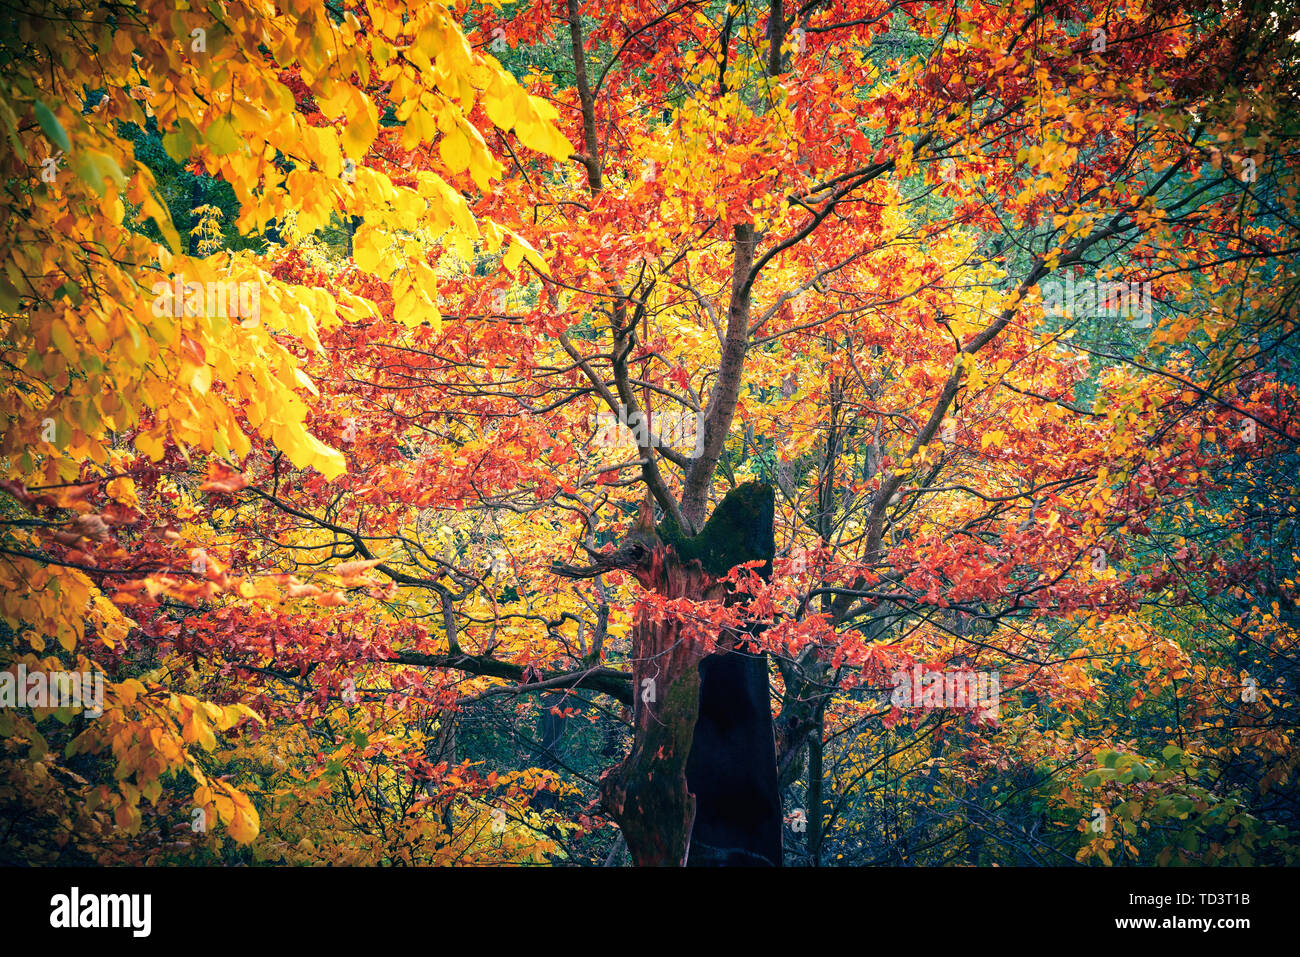 Vibrant trees in autumn forest Stock Photo